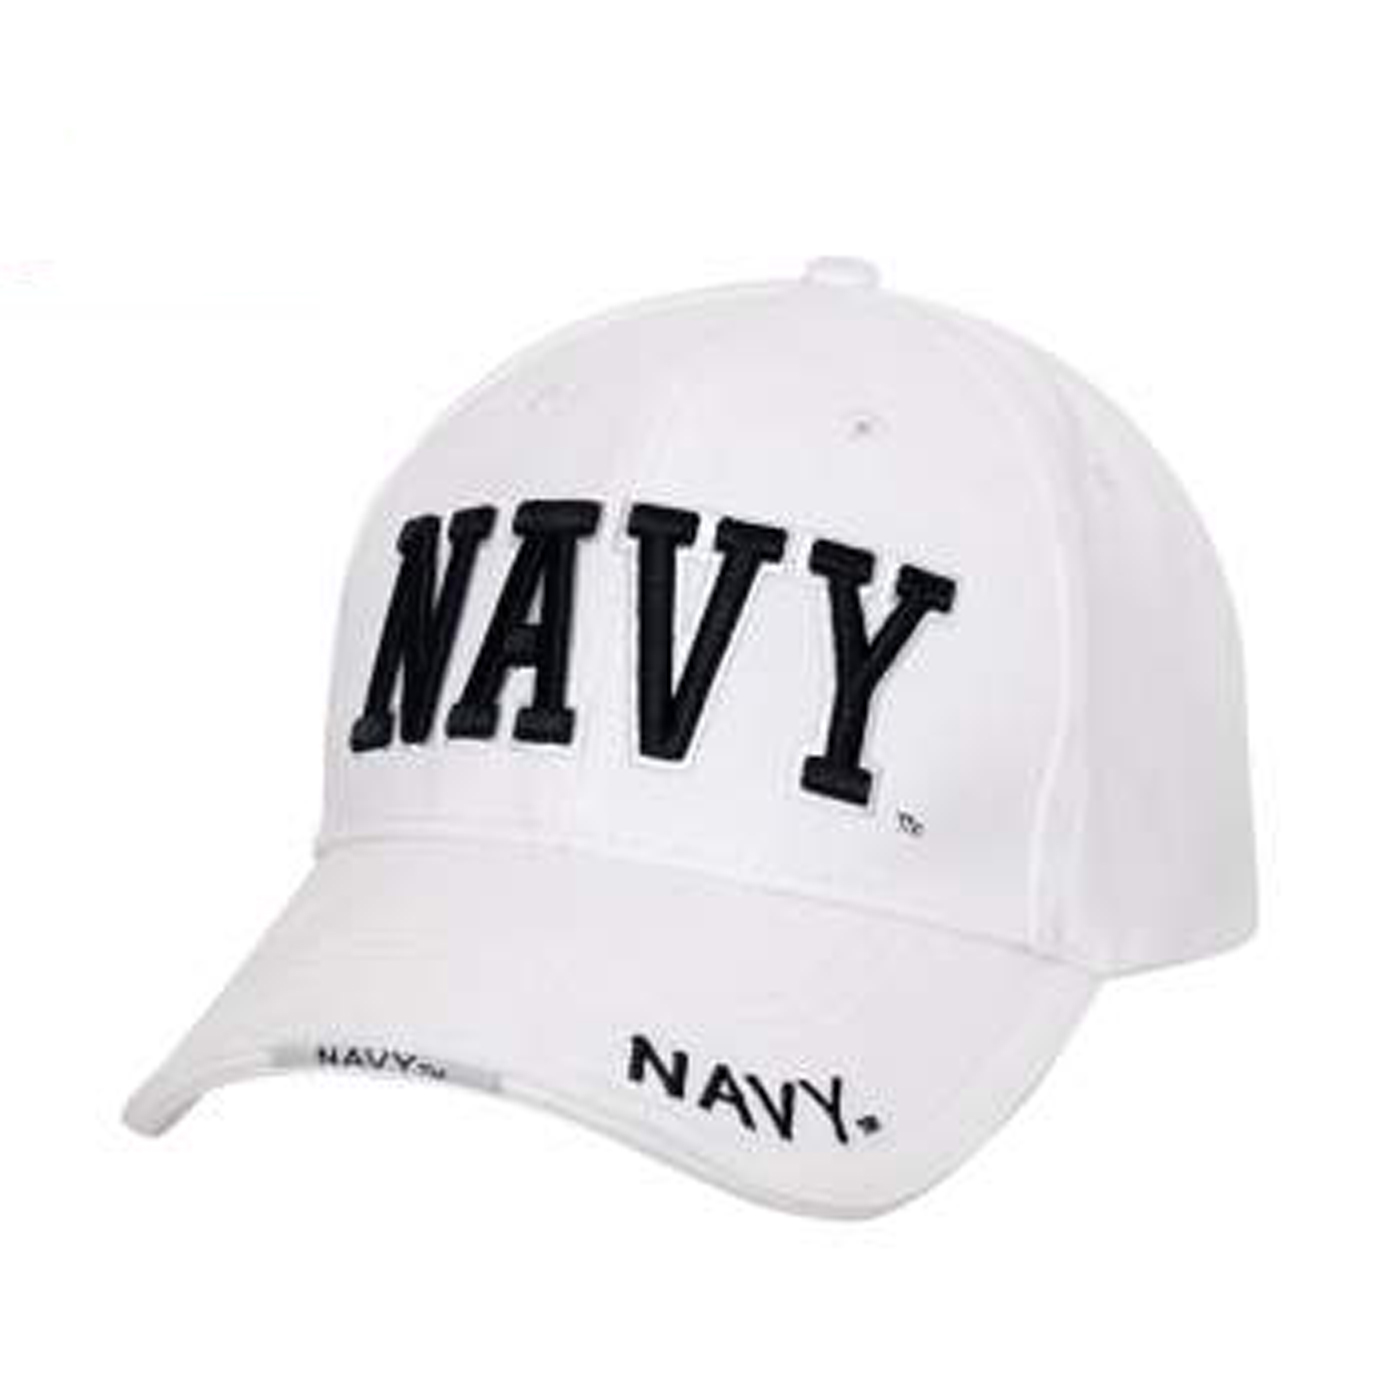 White Navy Veteran Baseball Cap Vet Embroidered Blue Letters, Men WomenOne Size Adjustable Relaxed Fit for Medium, Large, XL and Some XXL - image 3 of 5